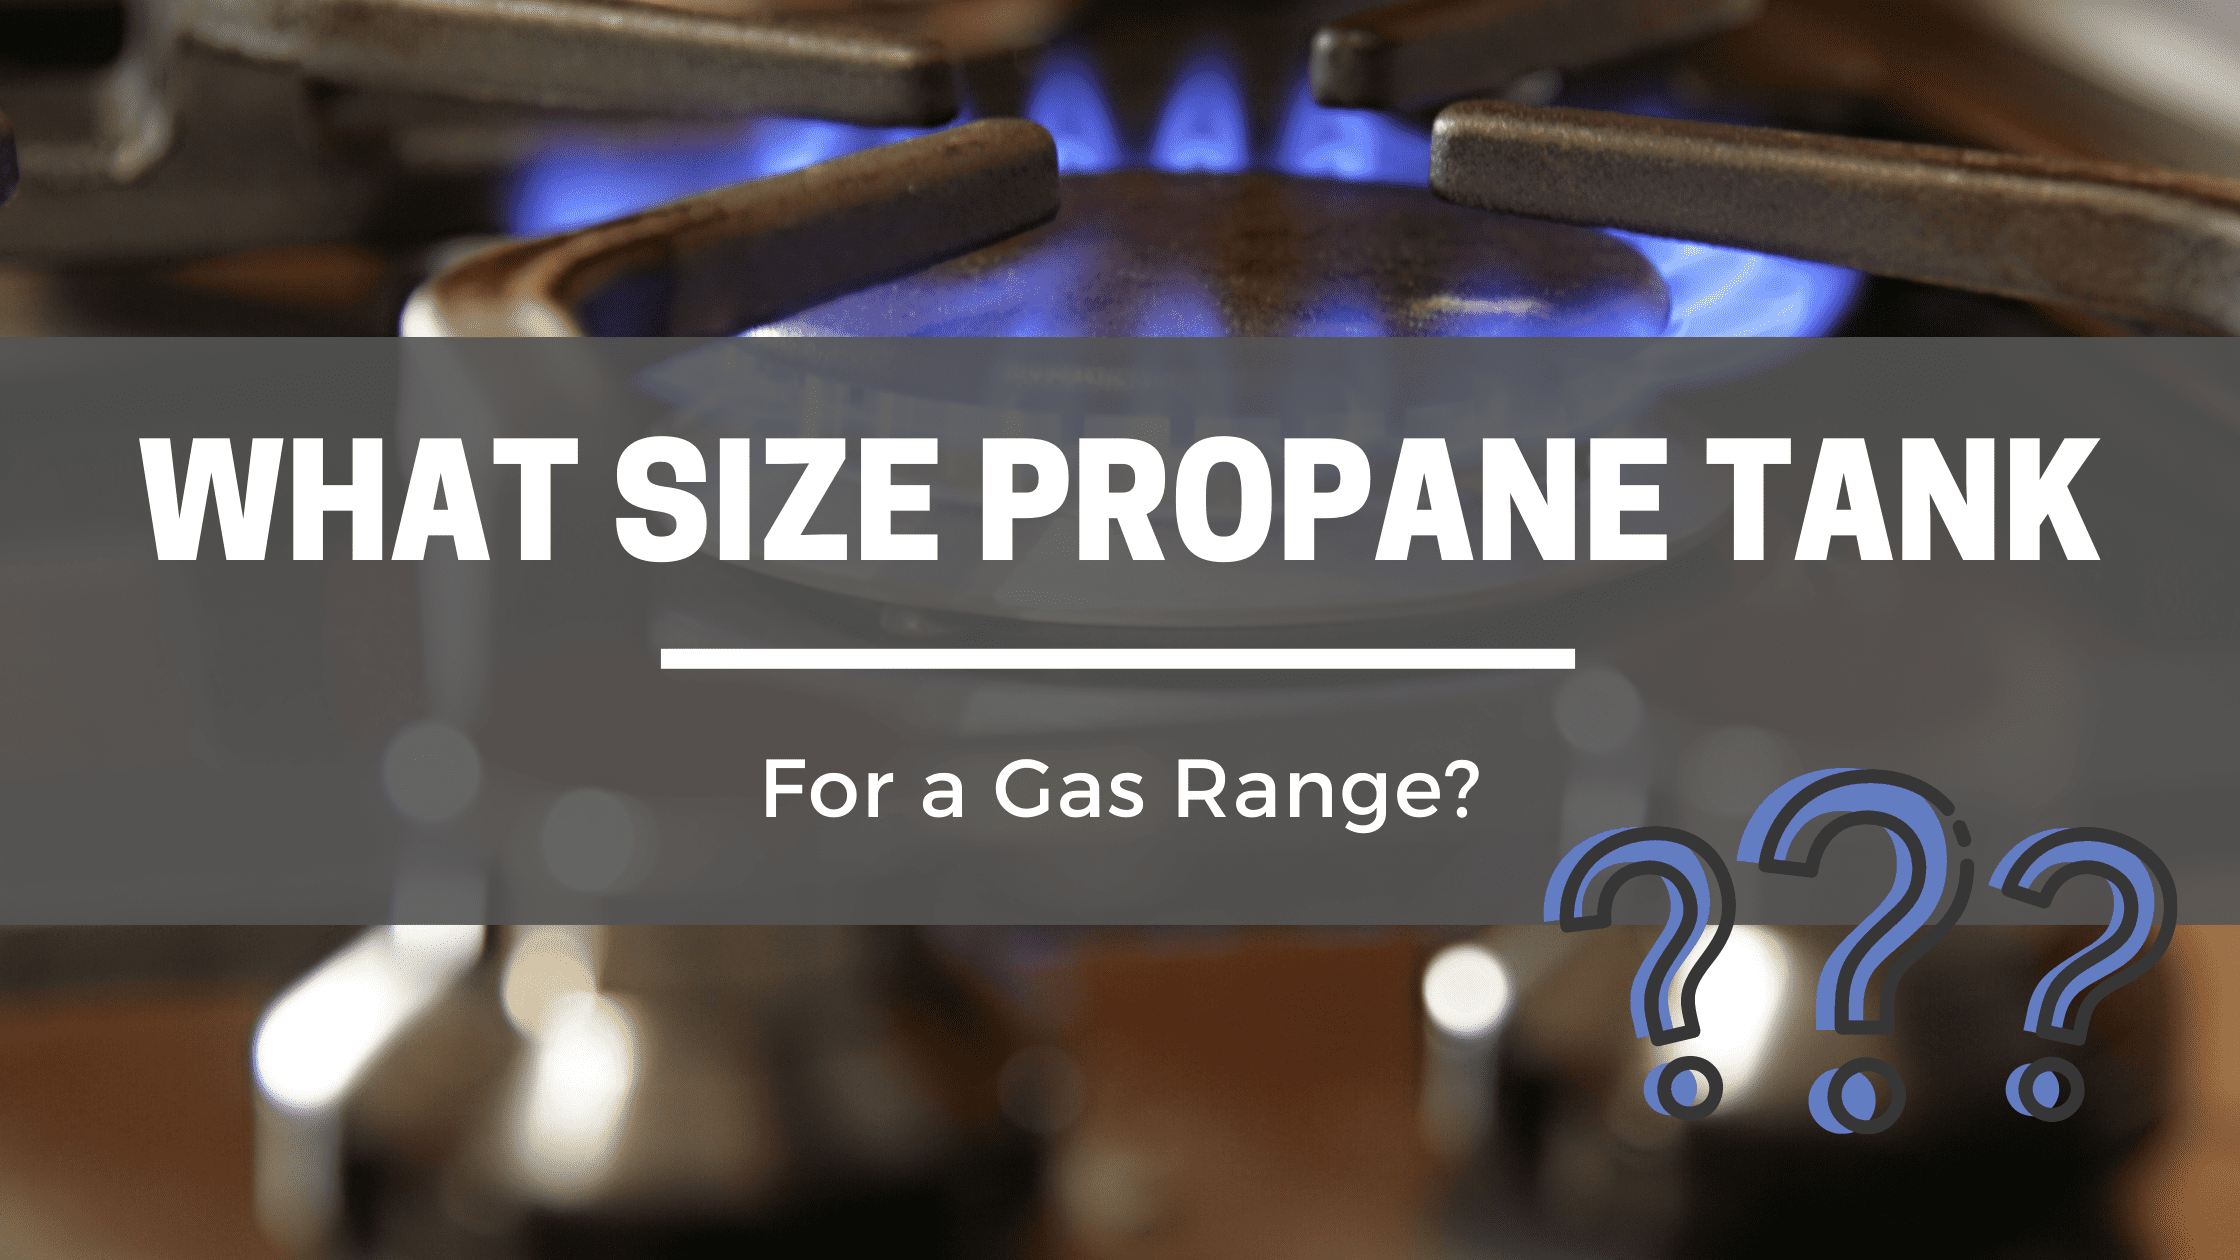 What Size Propane Tank Do You Need For a Gas Range?